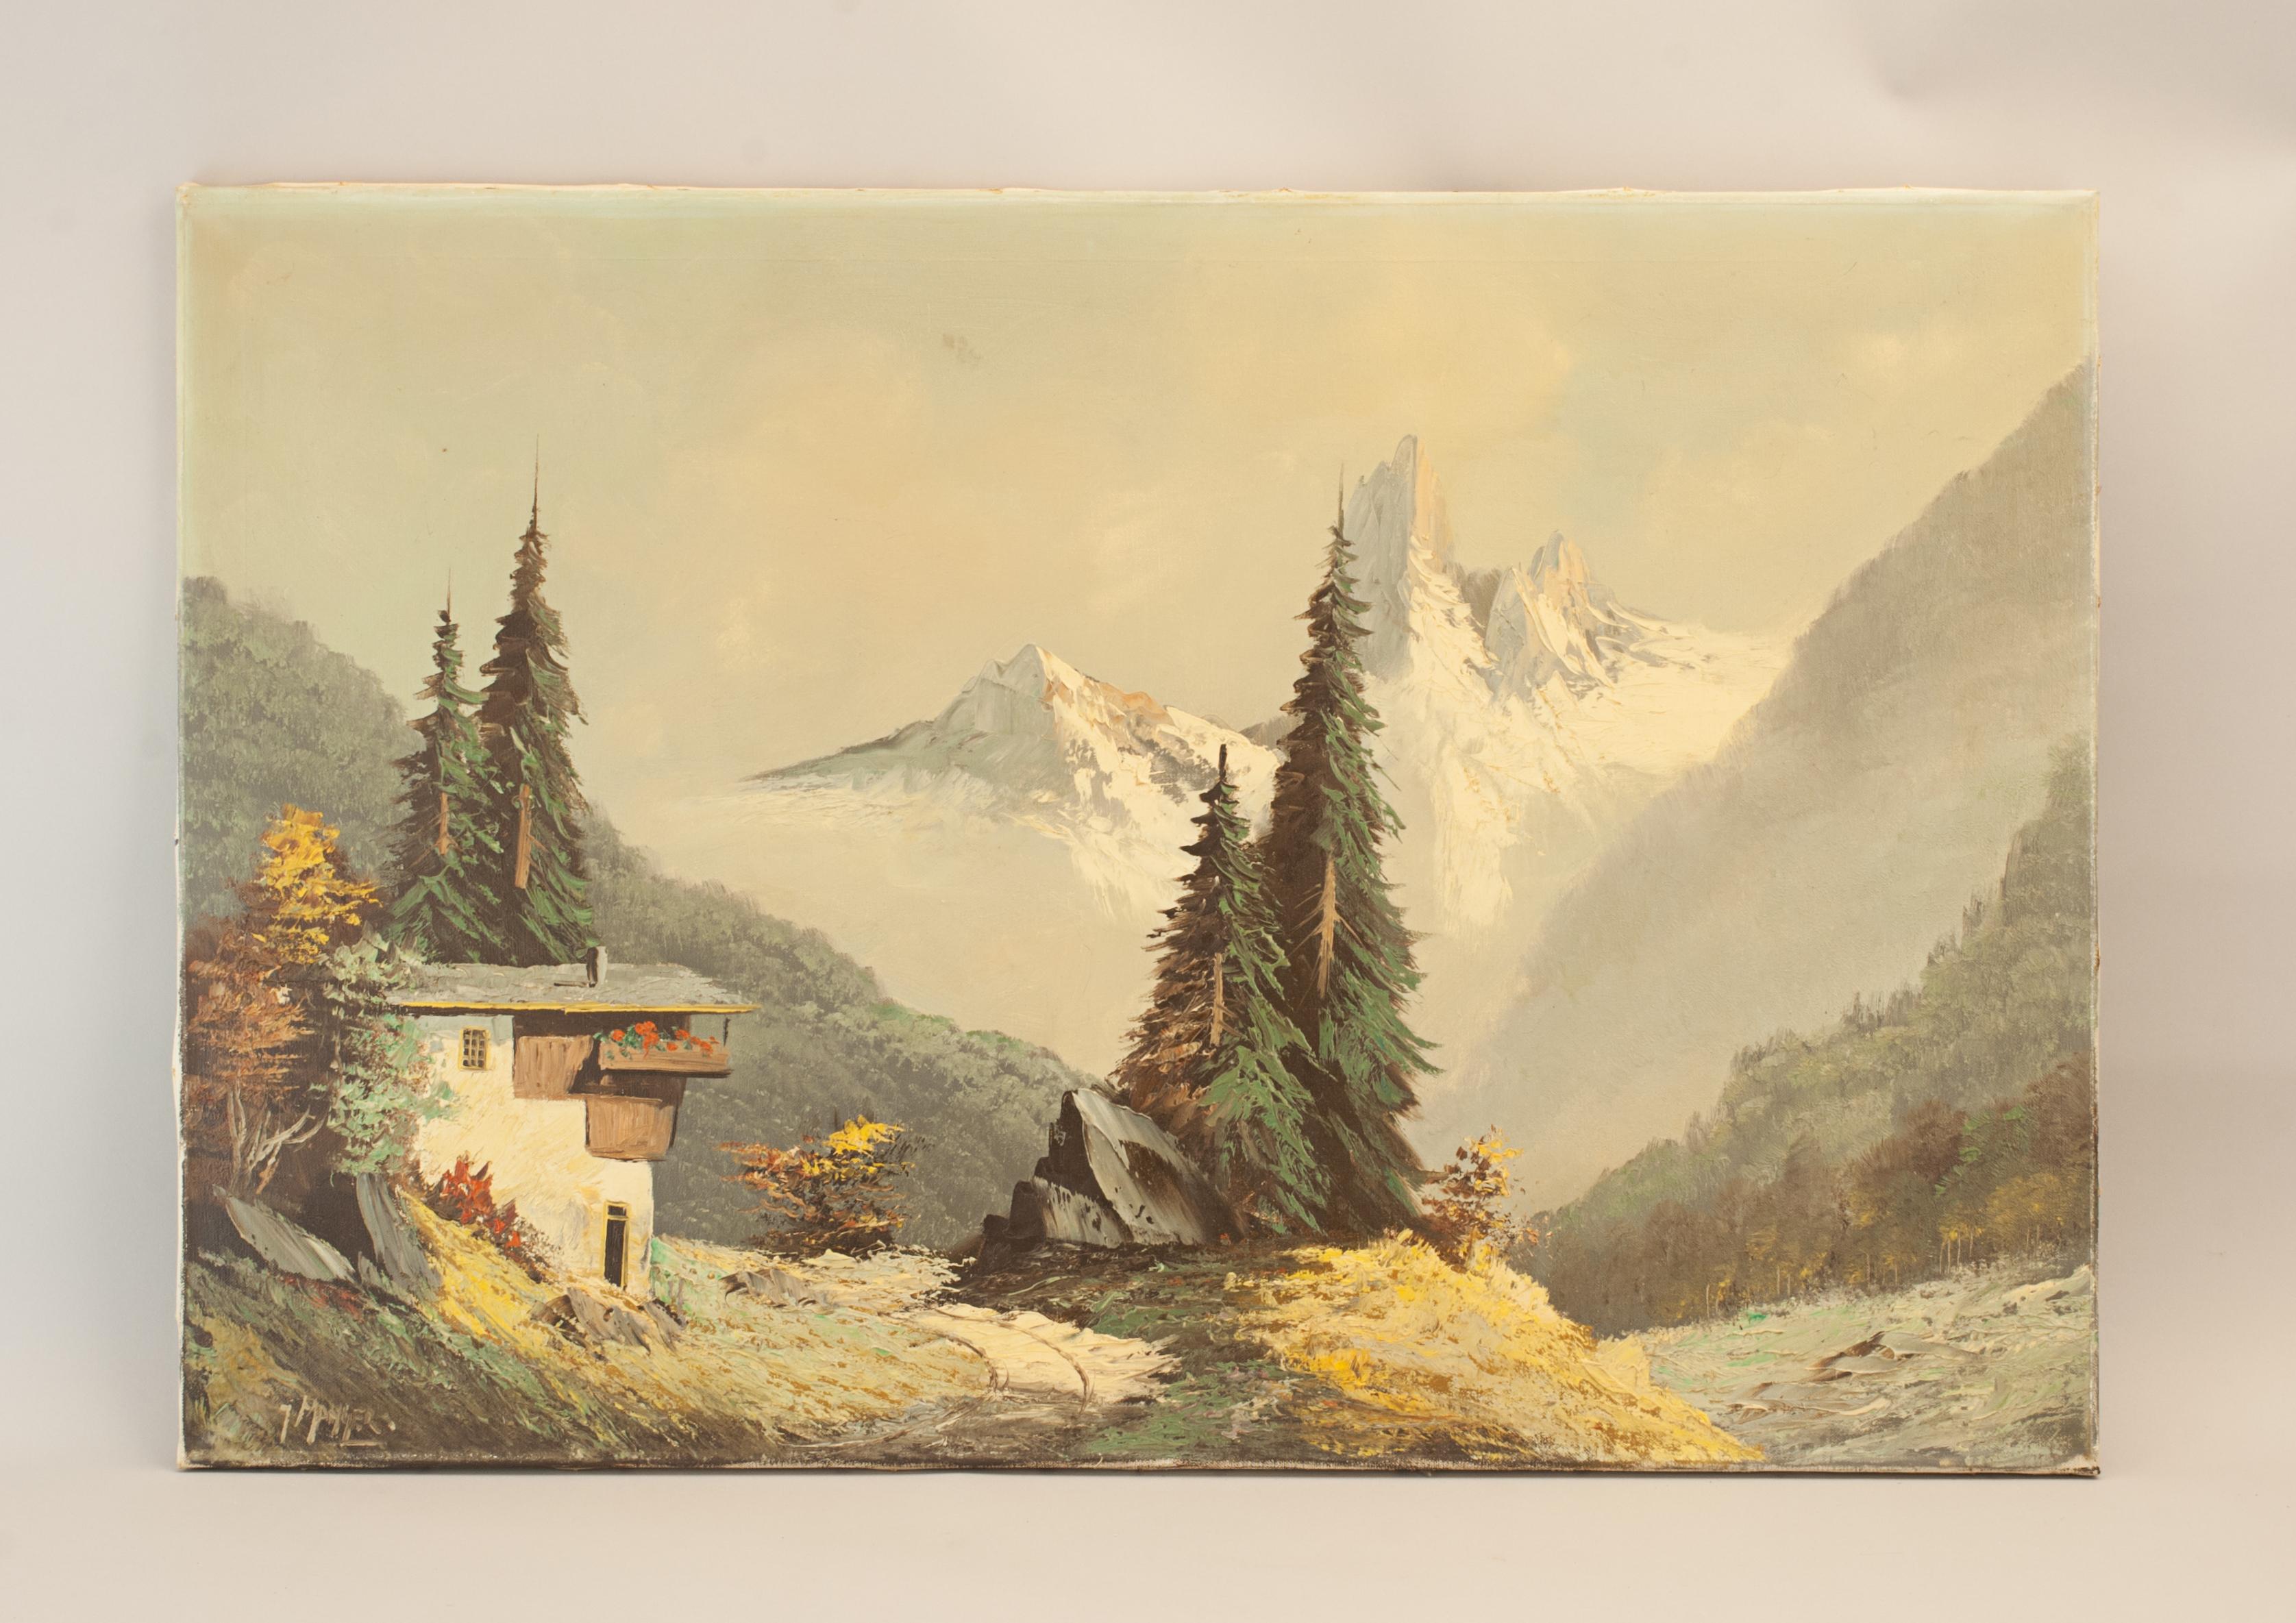 Vintage Oil On Canvas, Alpine Winter Landscape.
An outstandingly fine work of a winter alpine landscape with a chalet and trees in the foreground, a large mountain range in the background. Signed bottom left-hand corner, Mahger or